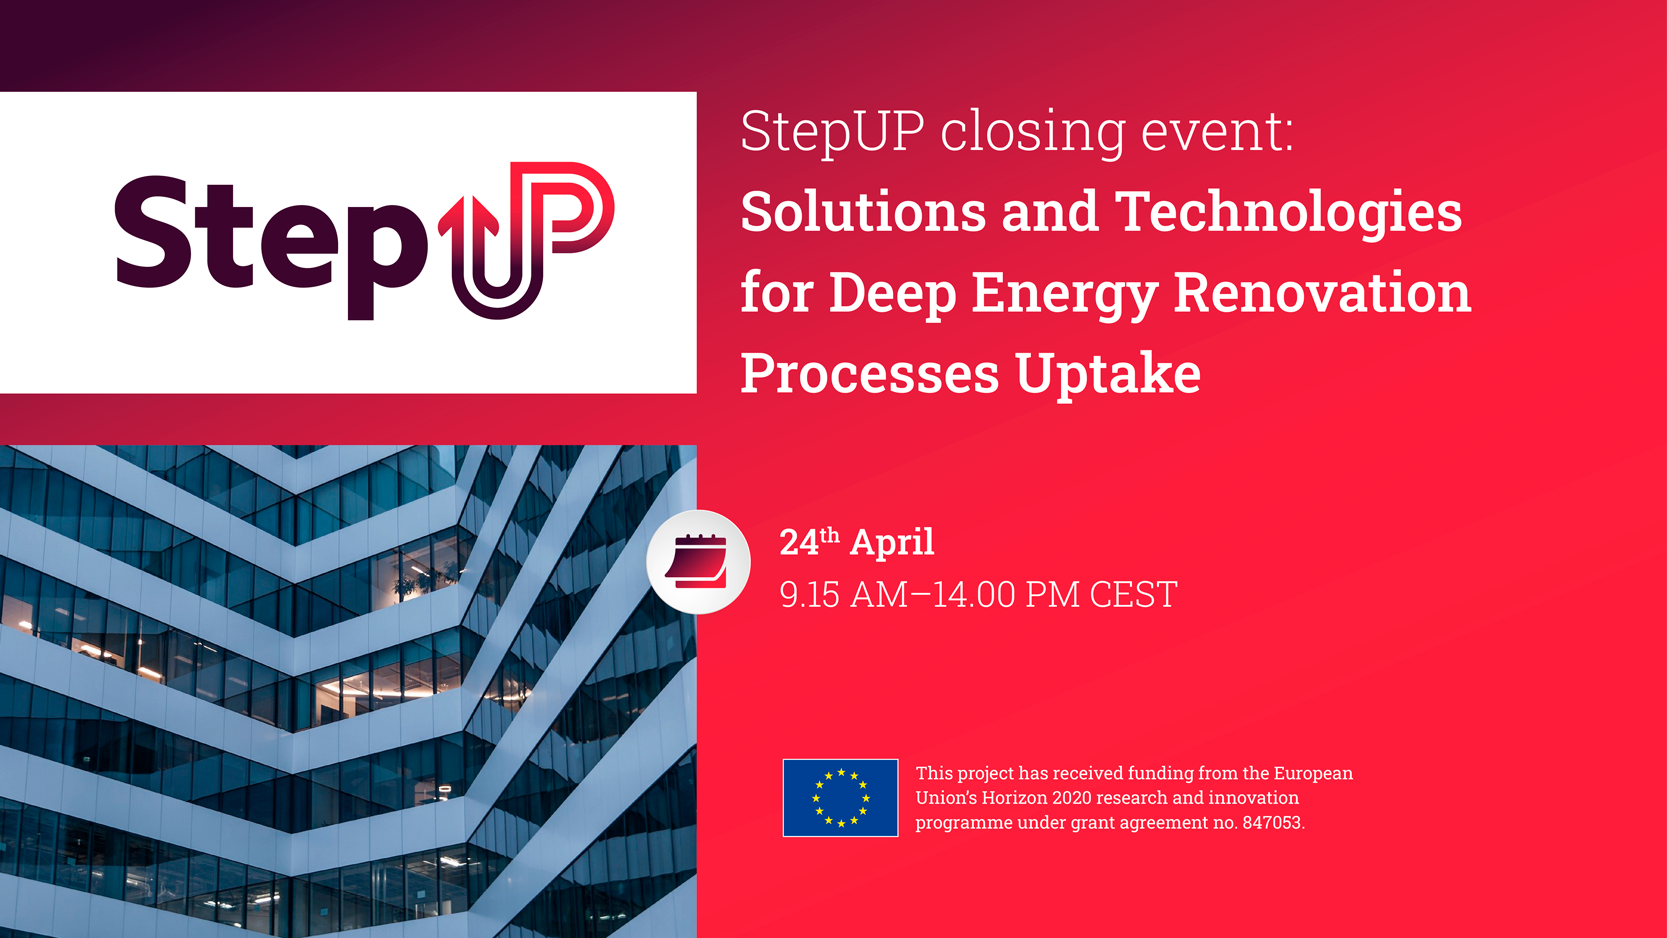 Solutions and Technologies for Deep Energy Renovation Processes Uptake